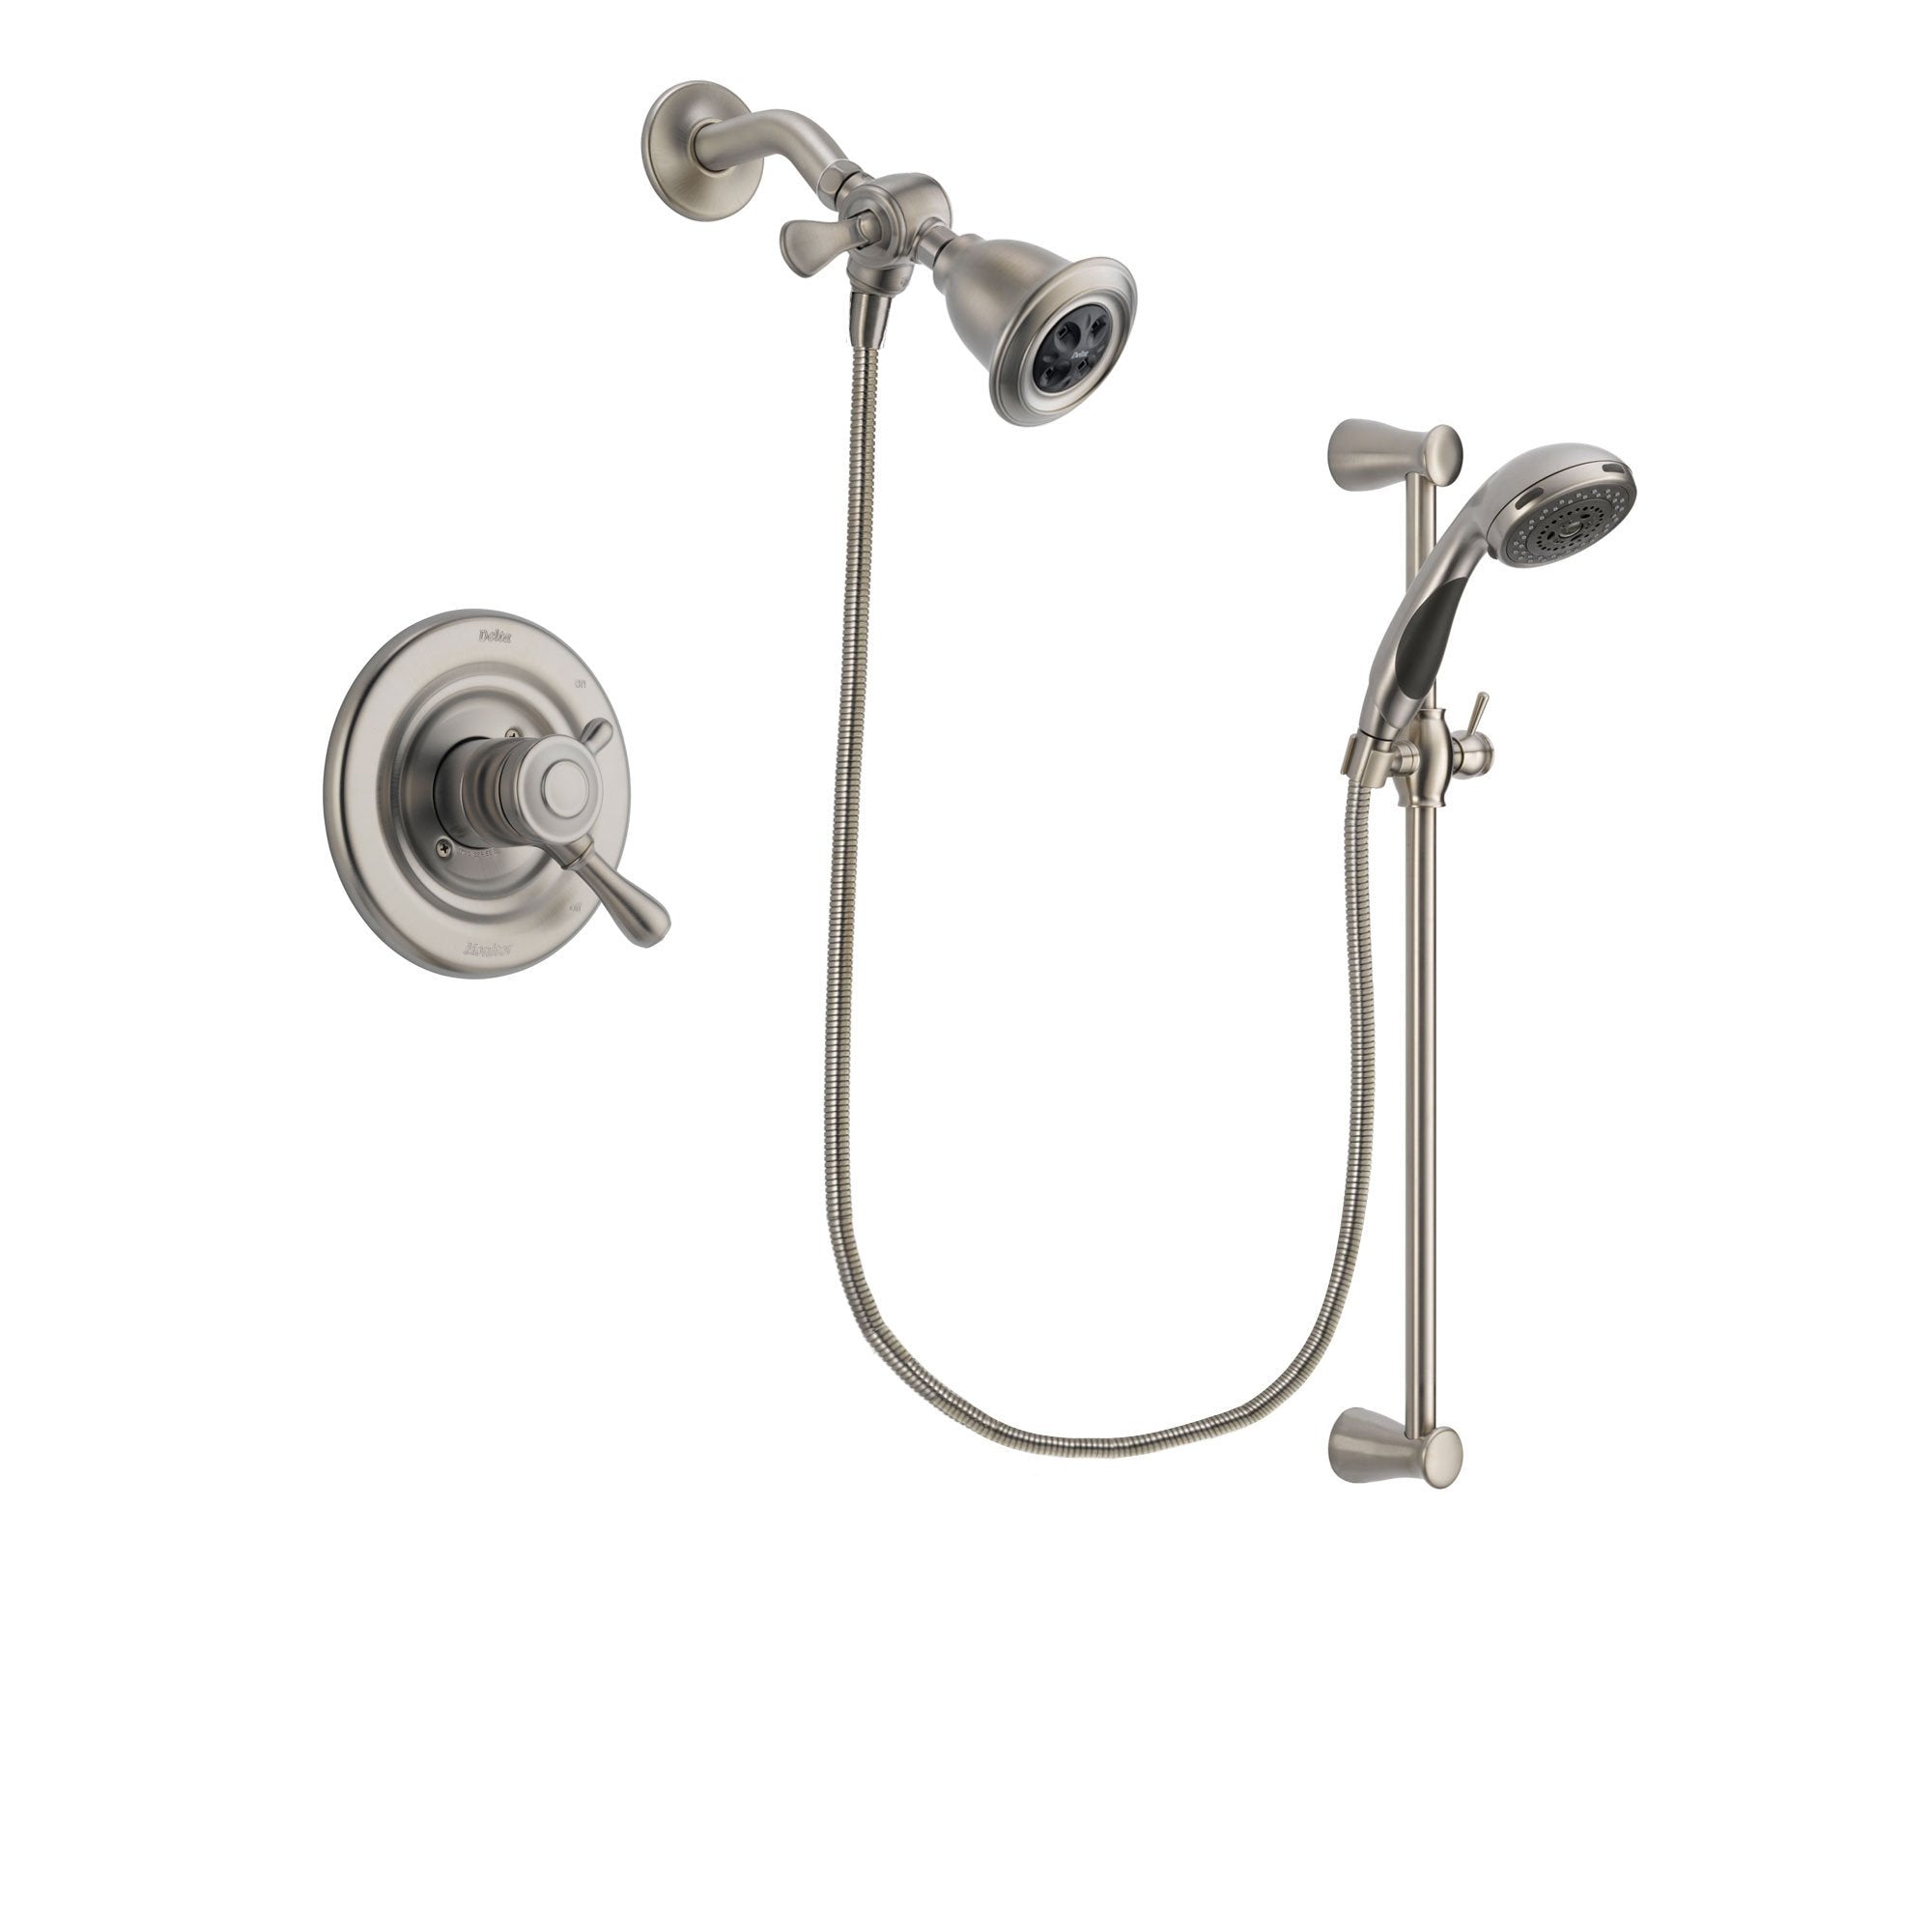 Delta Leland Stainless Steel Finish Dual Control Shower Faucet System Package with Water Efficient Showerhead and Handheld Shower Spray with Slide Bar Includes Rough-in Valve DSP1574V